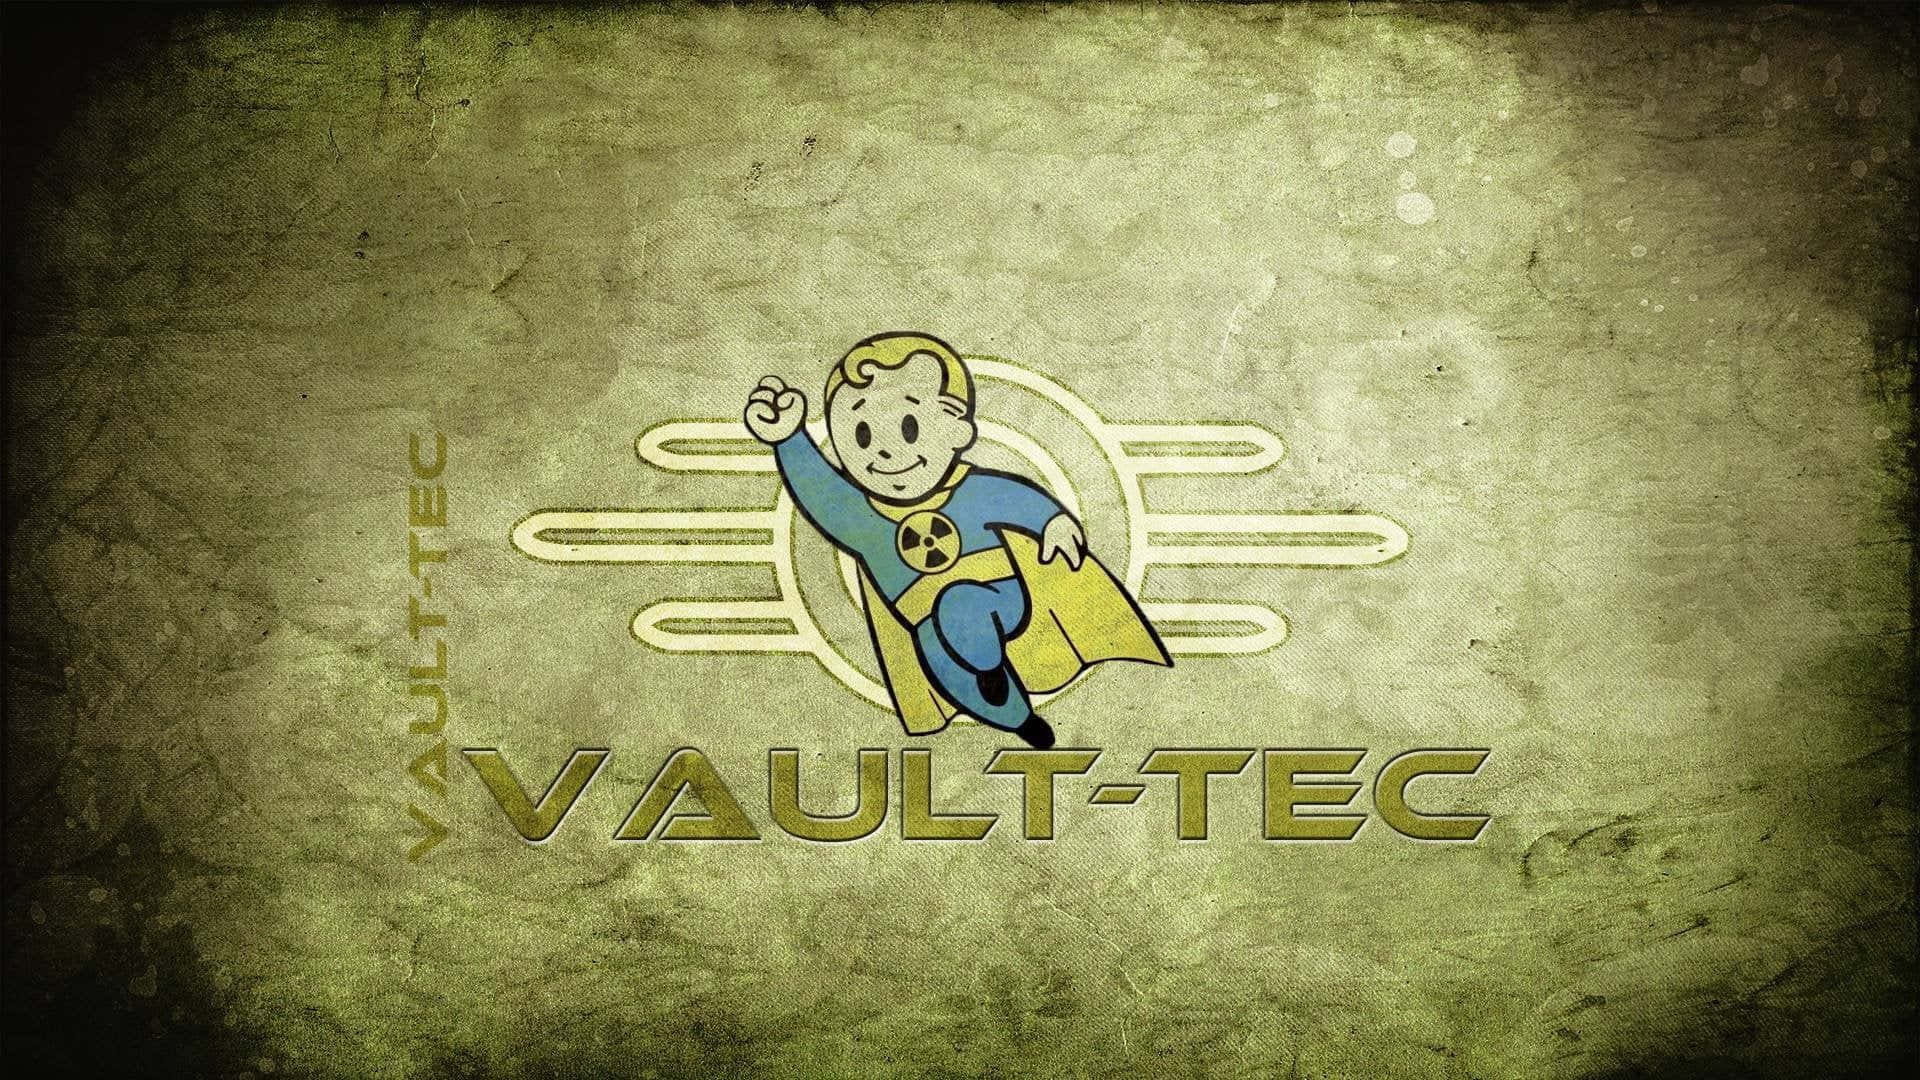 Vault-Tec Themed Background with Gears Wallpaper